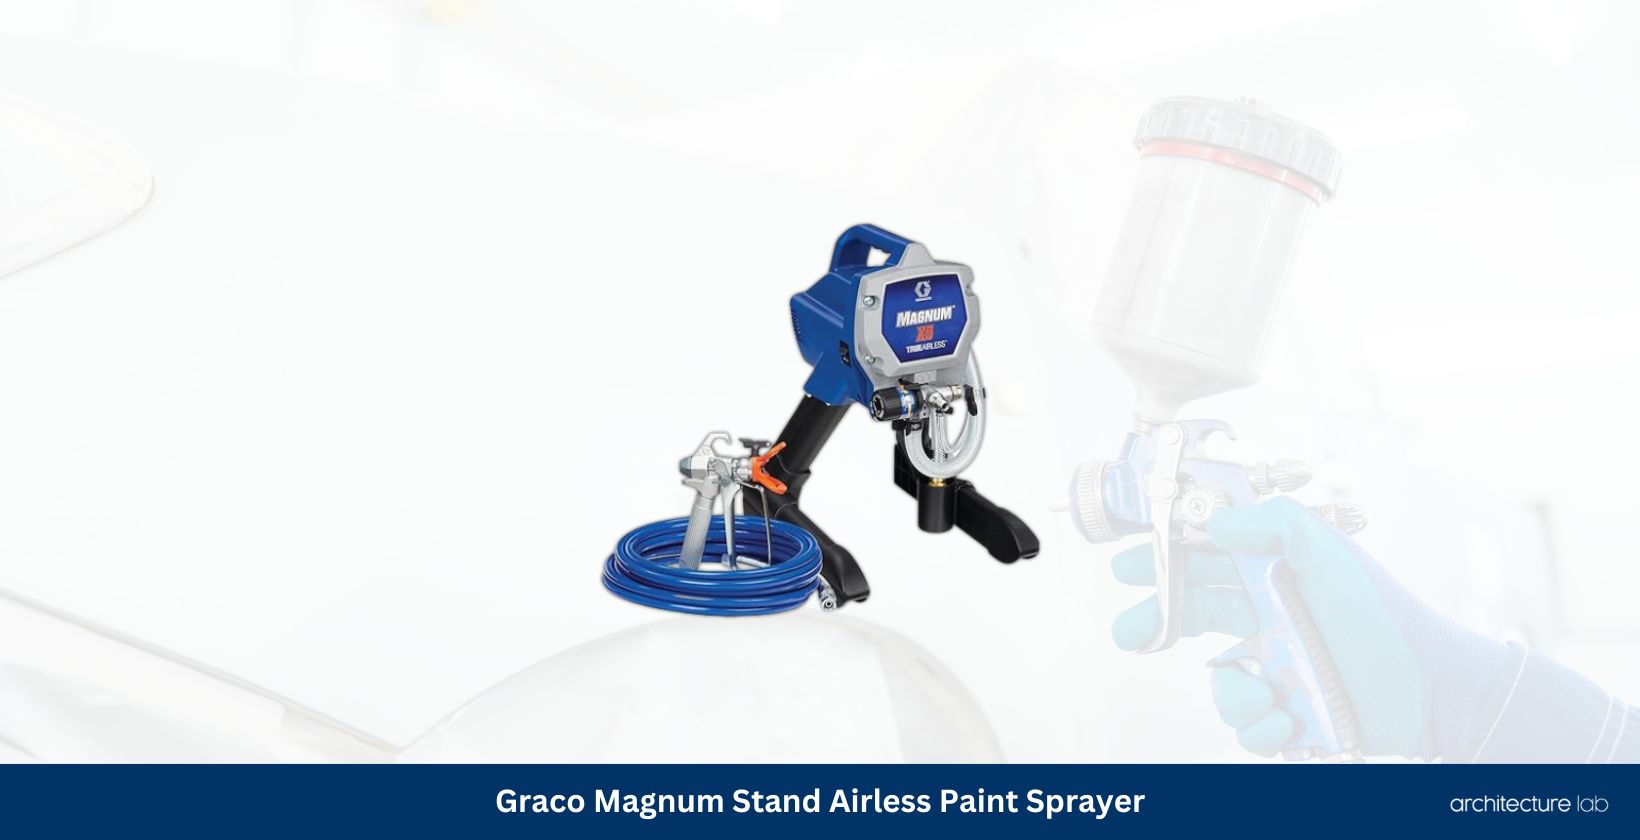 Graco magnum 262800 x5 stand airless paint sprayer